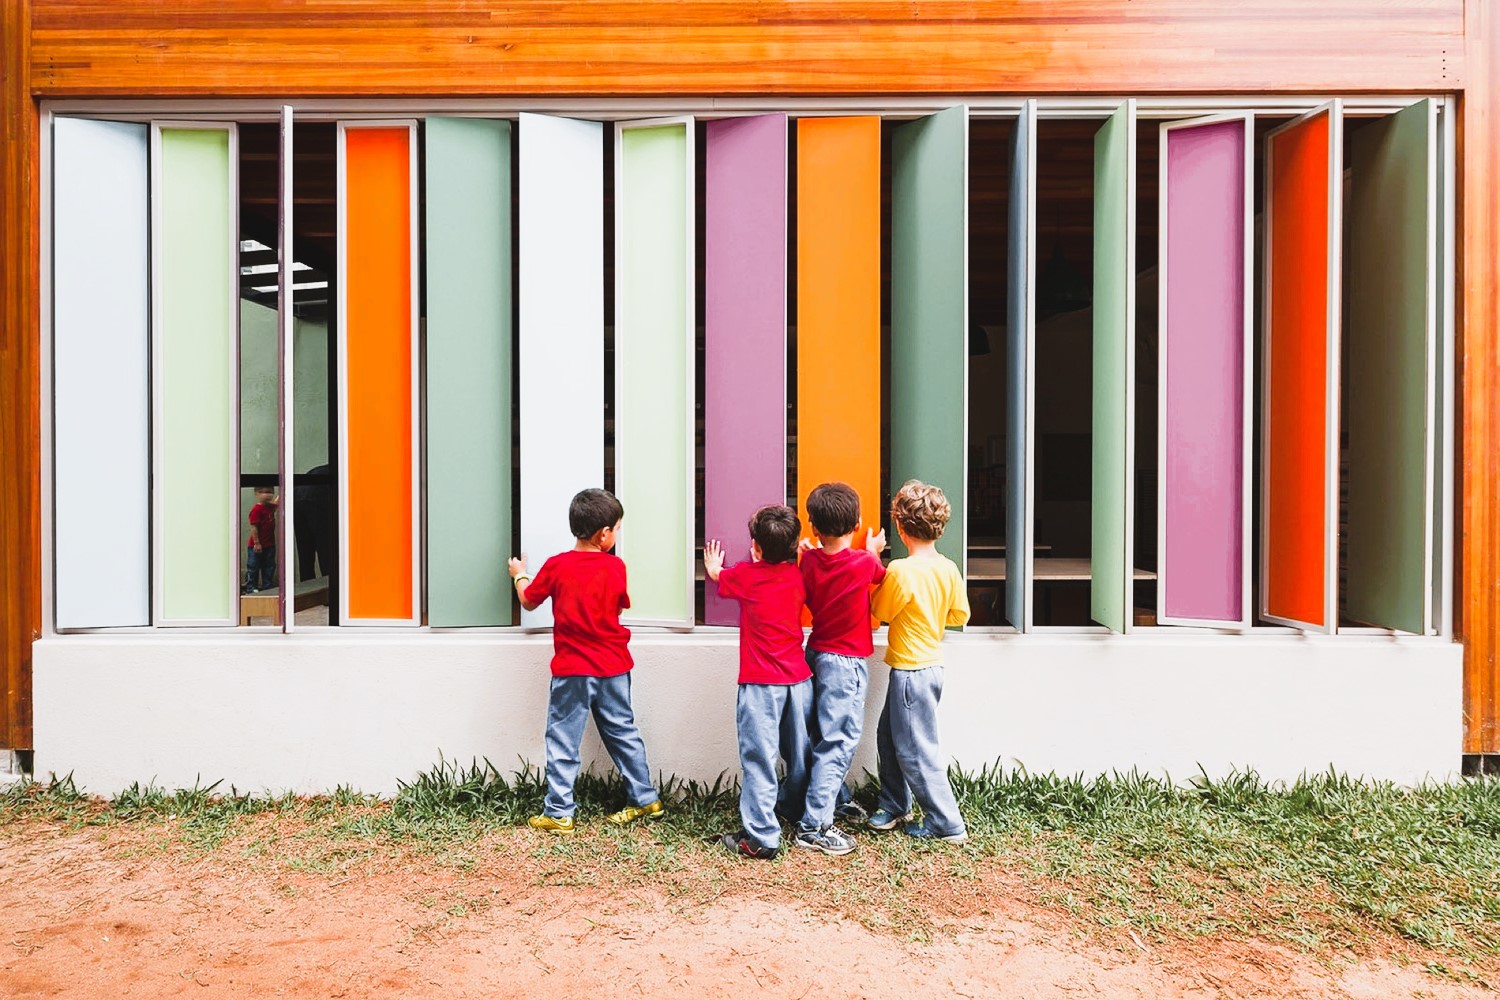 Children near the colorful wall